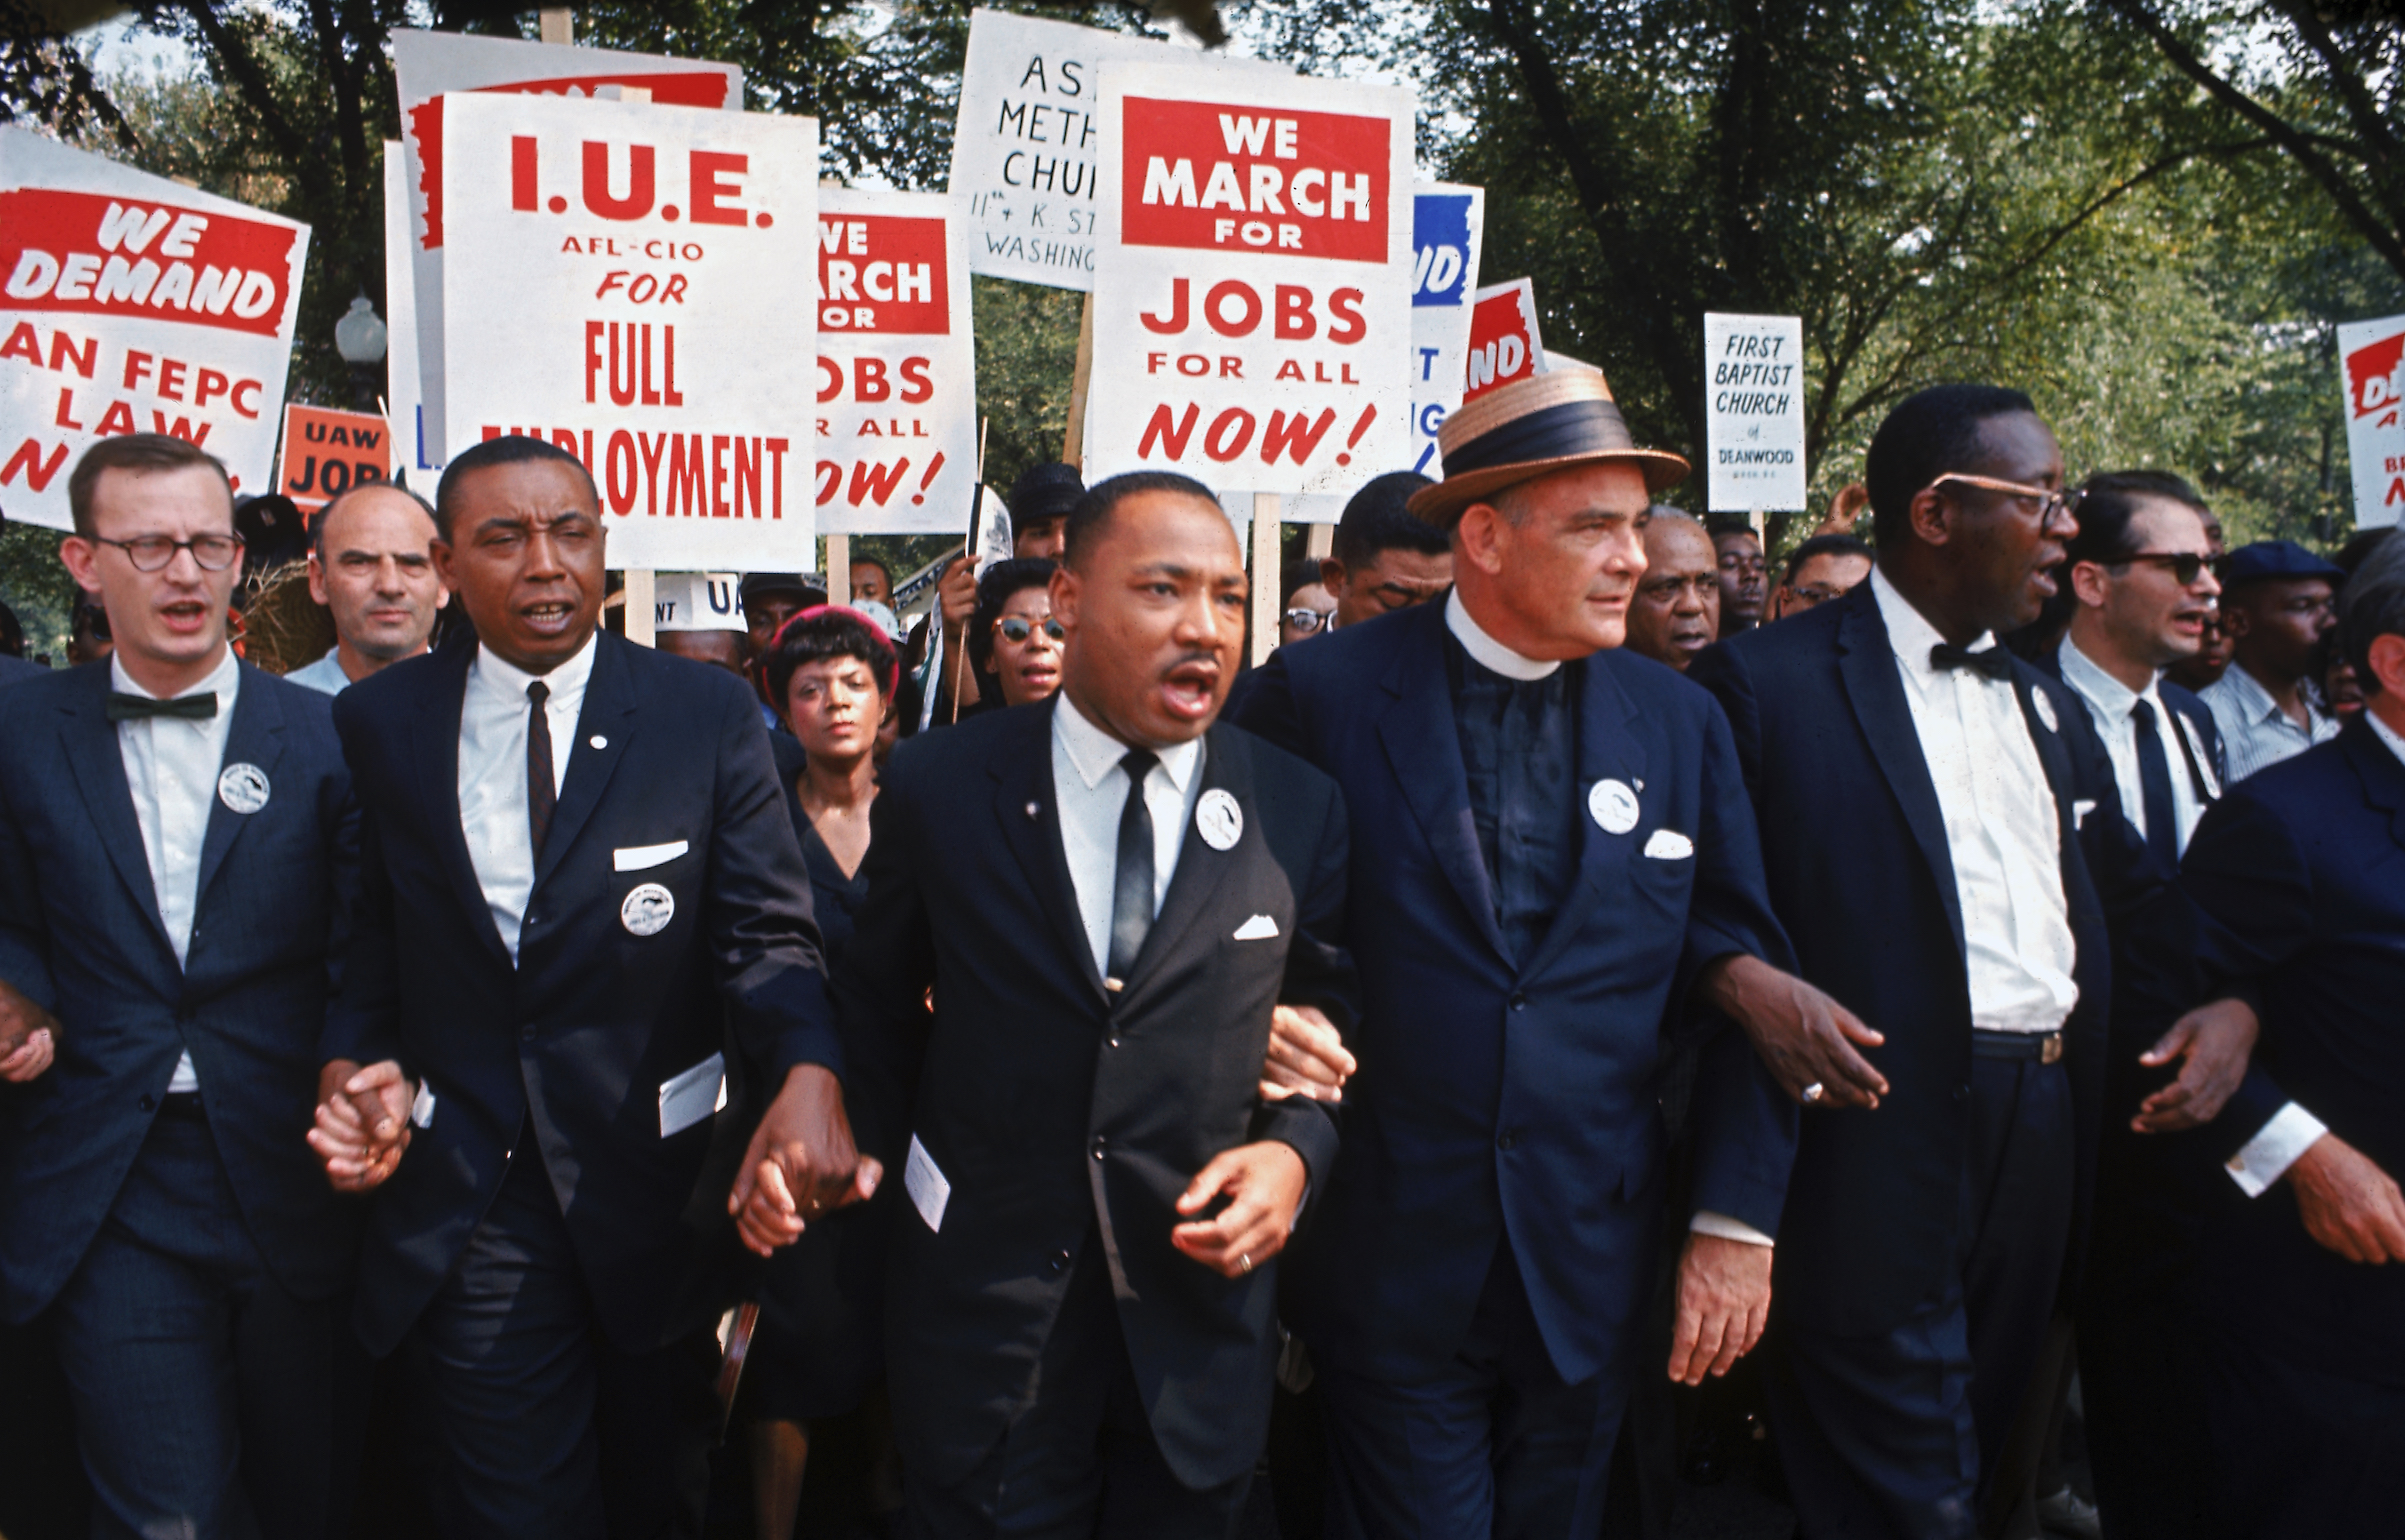 Leaders of the March on Washington for Jobs and Freedom. Left to right: Mathew Ahmann, Floyd McKissick, Martin Luther King Jr., Eugene Carson Blake and Cleveland Robinson (Robert W. Kelley—The LIFE Picture Collection / Getty Images)